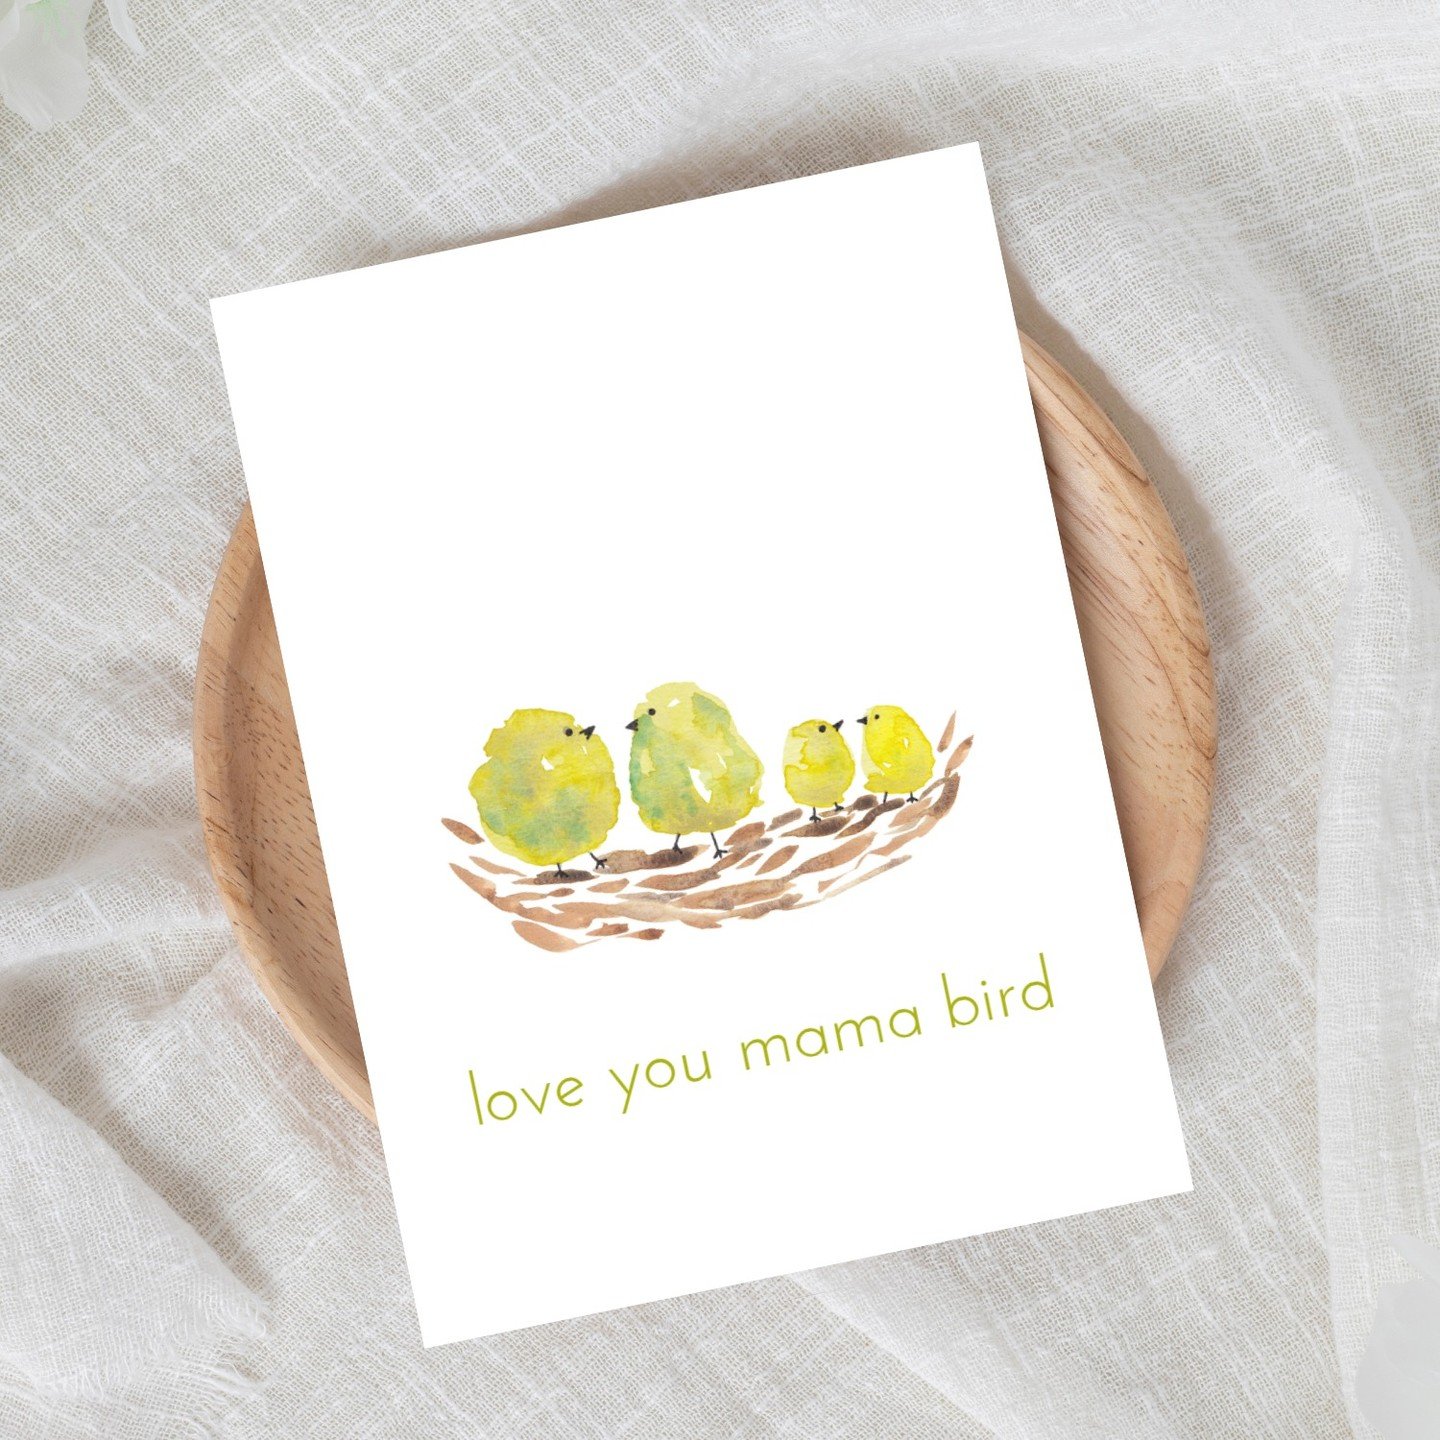 A little bird told me- Mom's love cards. 🐦

Just a couple of weeks until Mother's Day. Get your cards now. Available on my website, @penumbra.shop, my pop up @tuscanvillagenh on 5/5, and 5/11 @bedfordeventcenter.